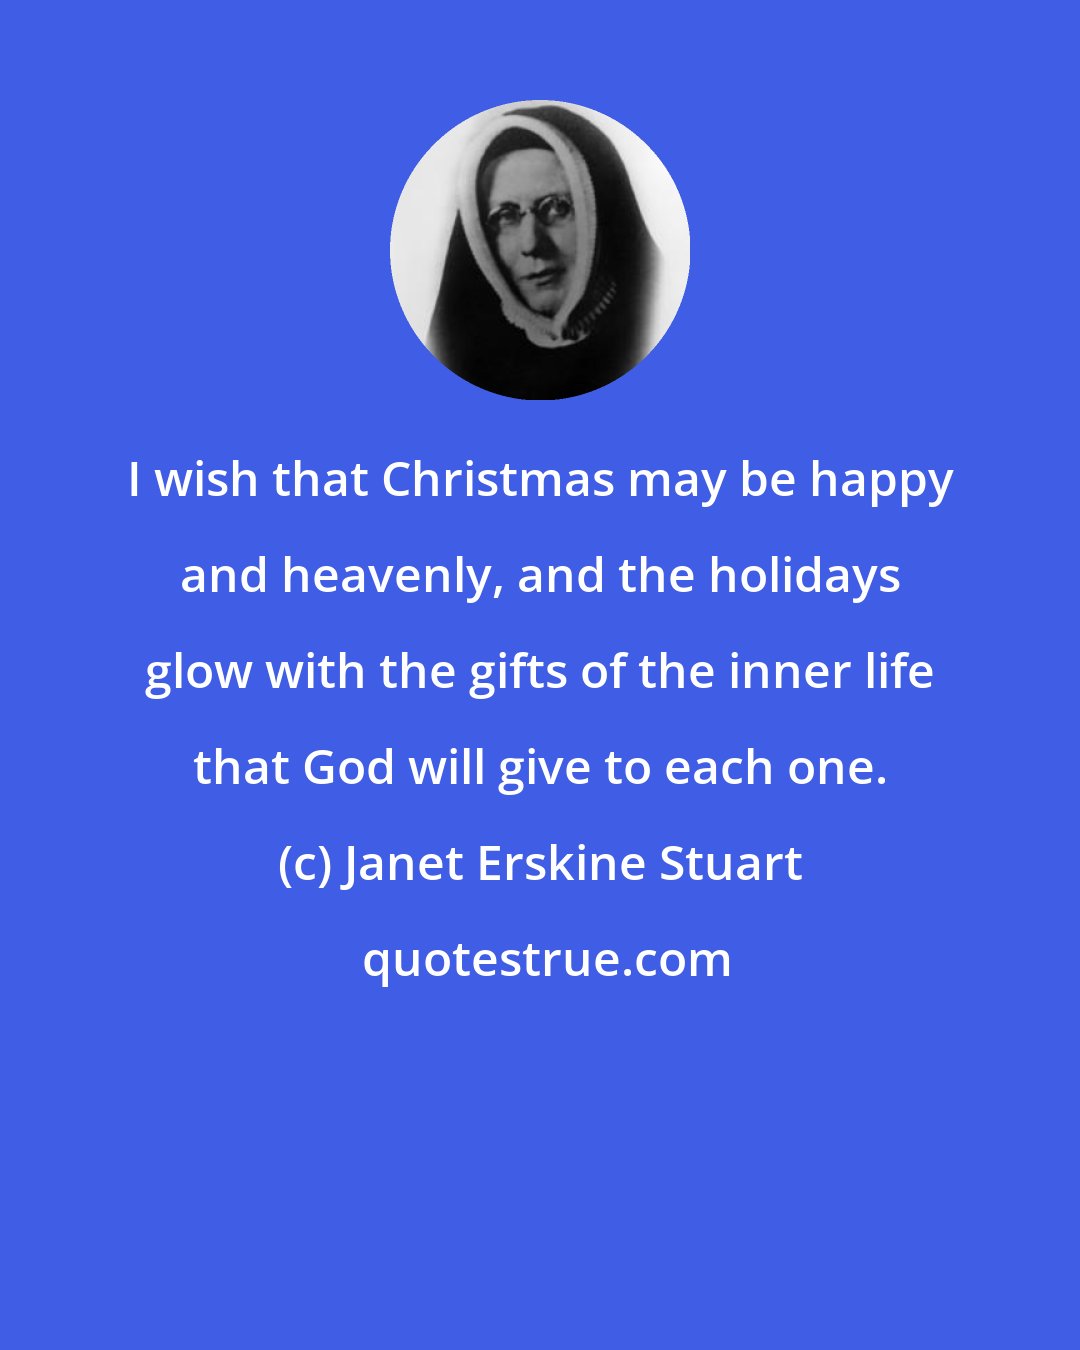 Janet Erskine Stuart: I wish that Christmas may be happy and heavenly, and the holidays glow with the gifts of the inner life that God will give to each one.